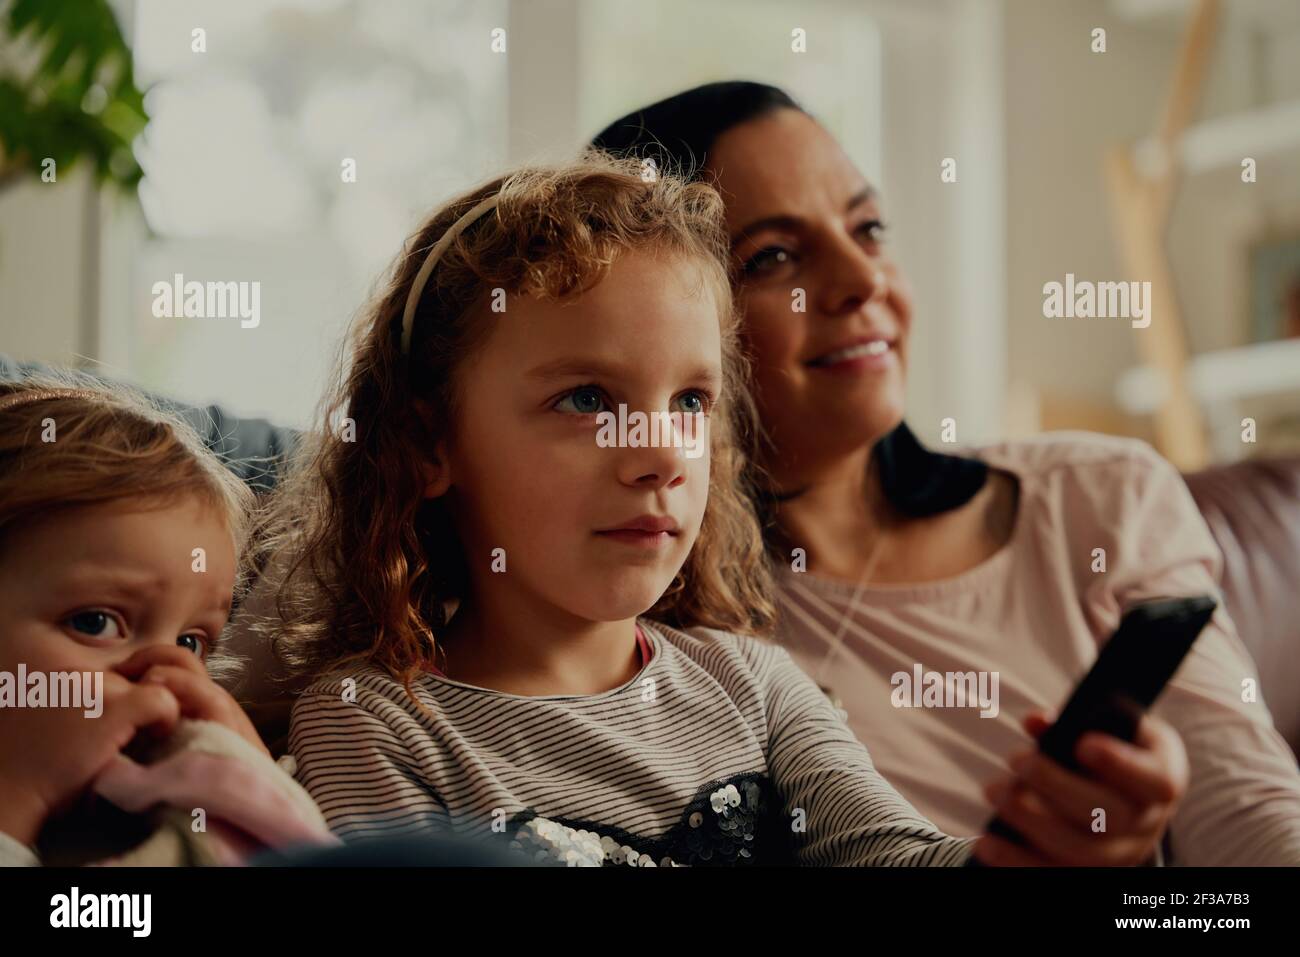 Concentrated girl holding remote control watching television with mother and sister at home Stock Photo